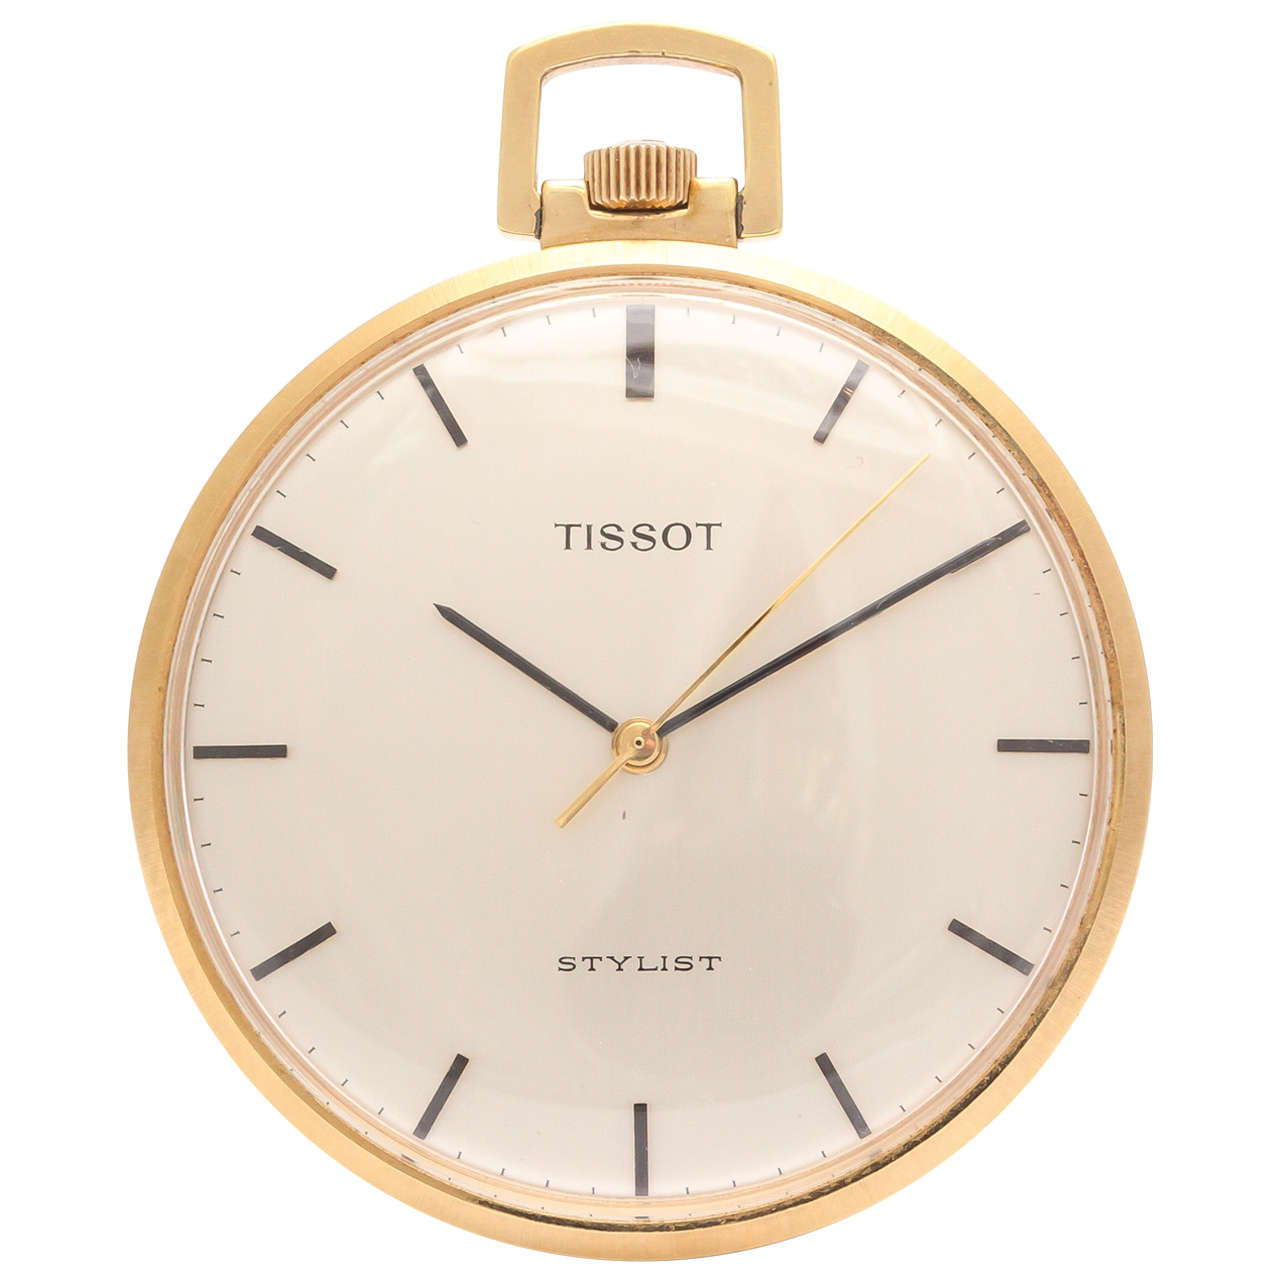 Tissot Yellow Gold Plated Open Faced Stylist Pocket Watch circa 1950s For Sale